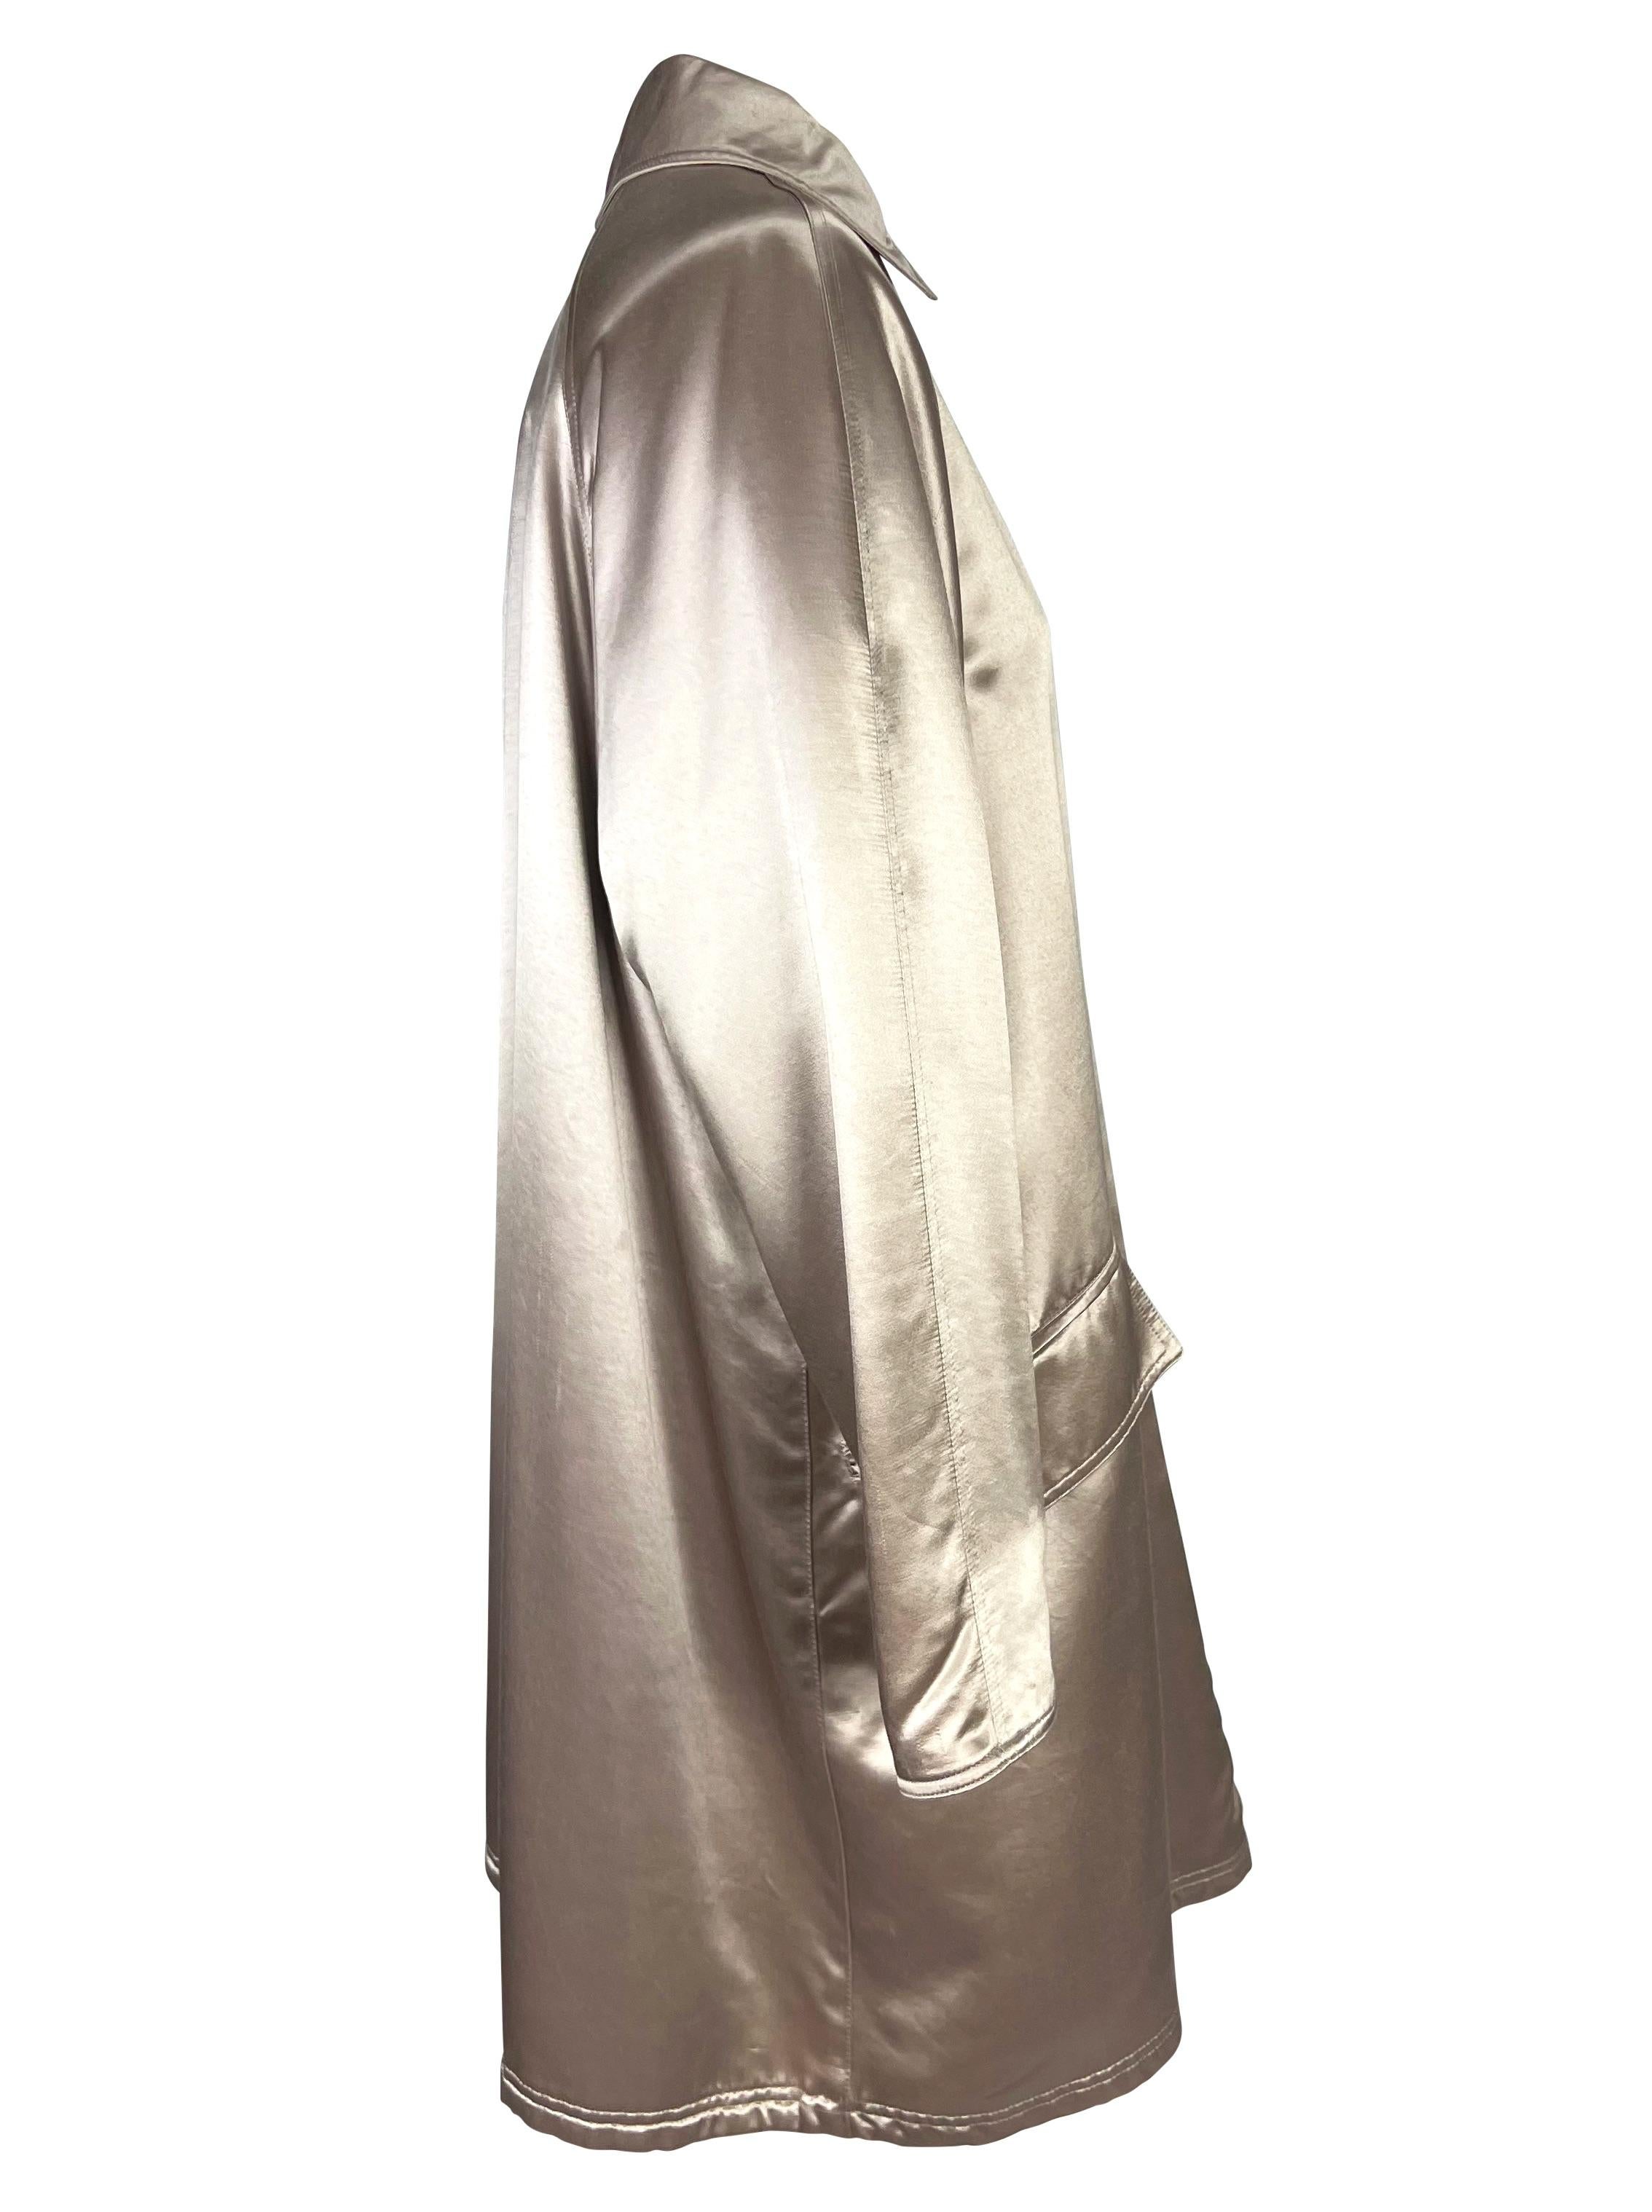 F/W 1995 Gianni Versace Couture Runway Silver Blush Satin Button Coat For Sale 5